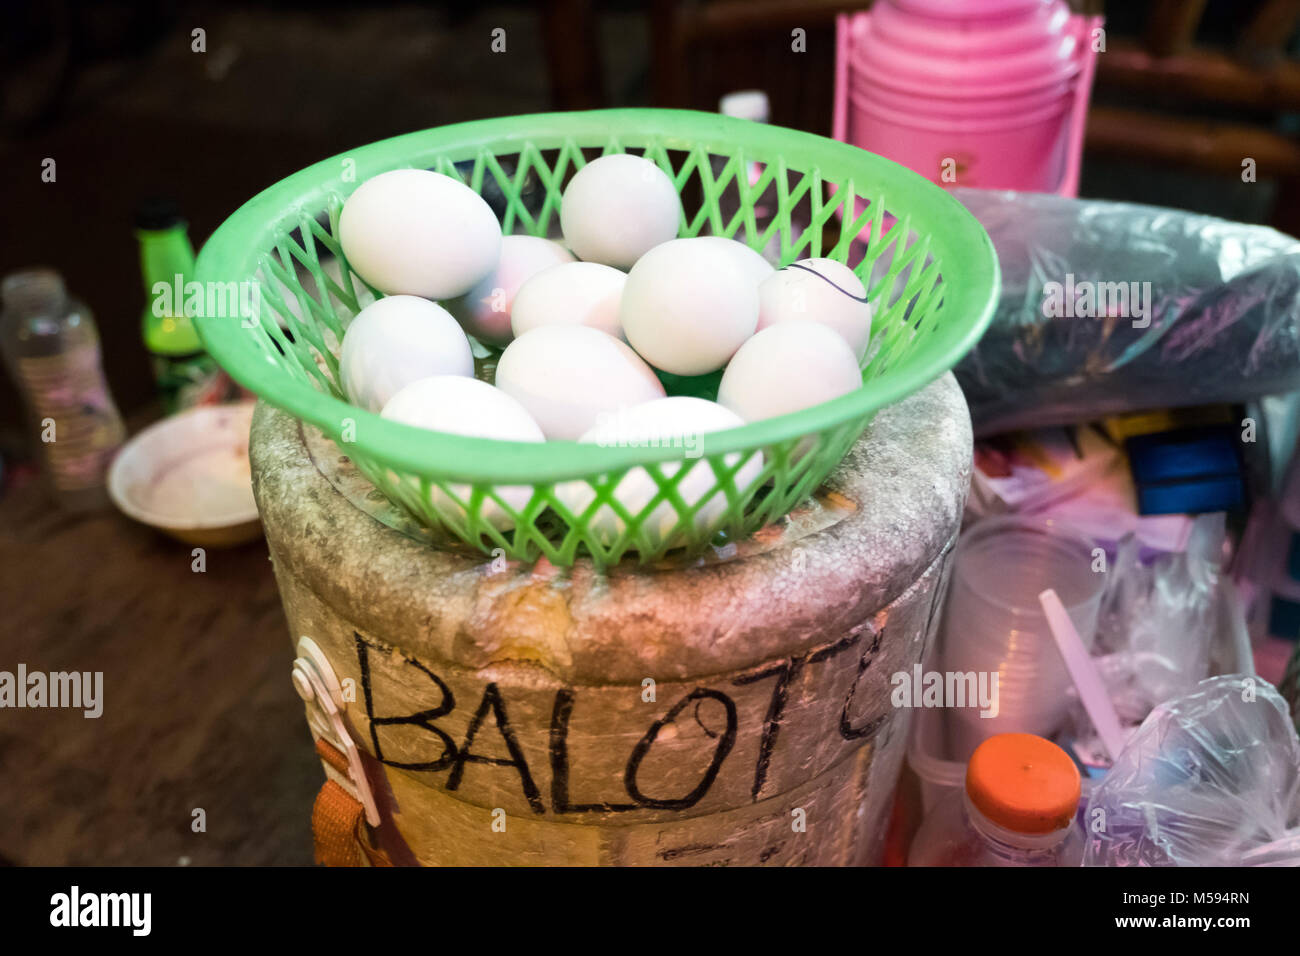 A night stand offers balot, cooked fertilized duck egg, Metro Manila, The Philippines Stock Photo